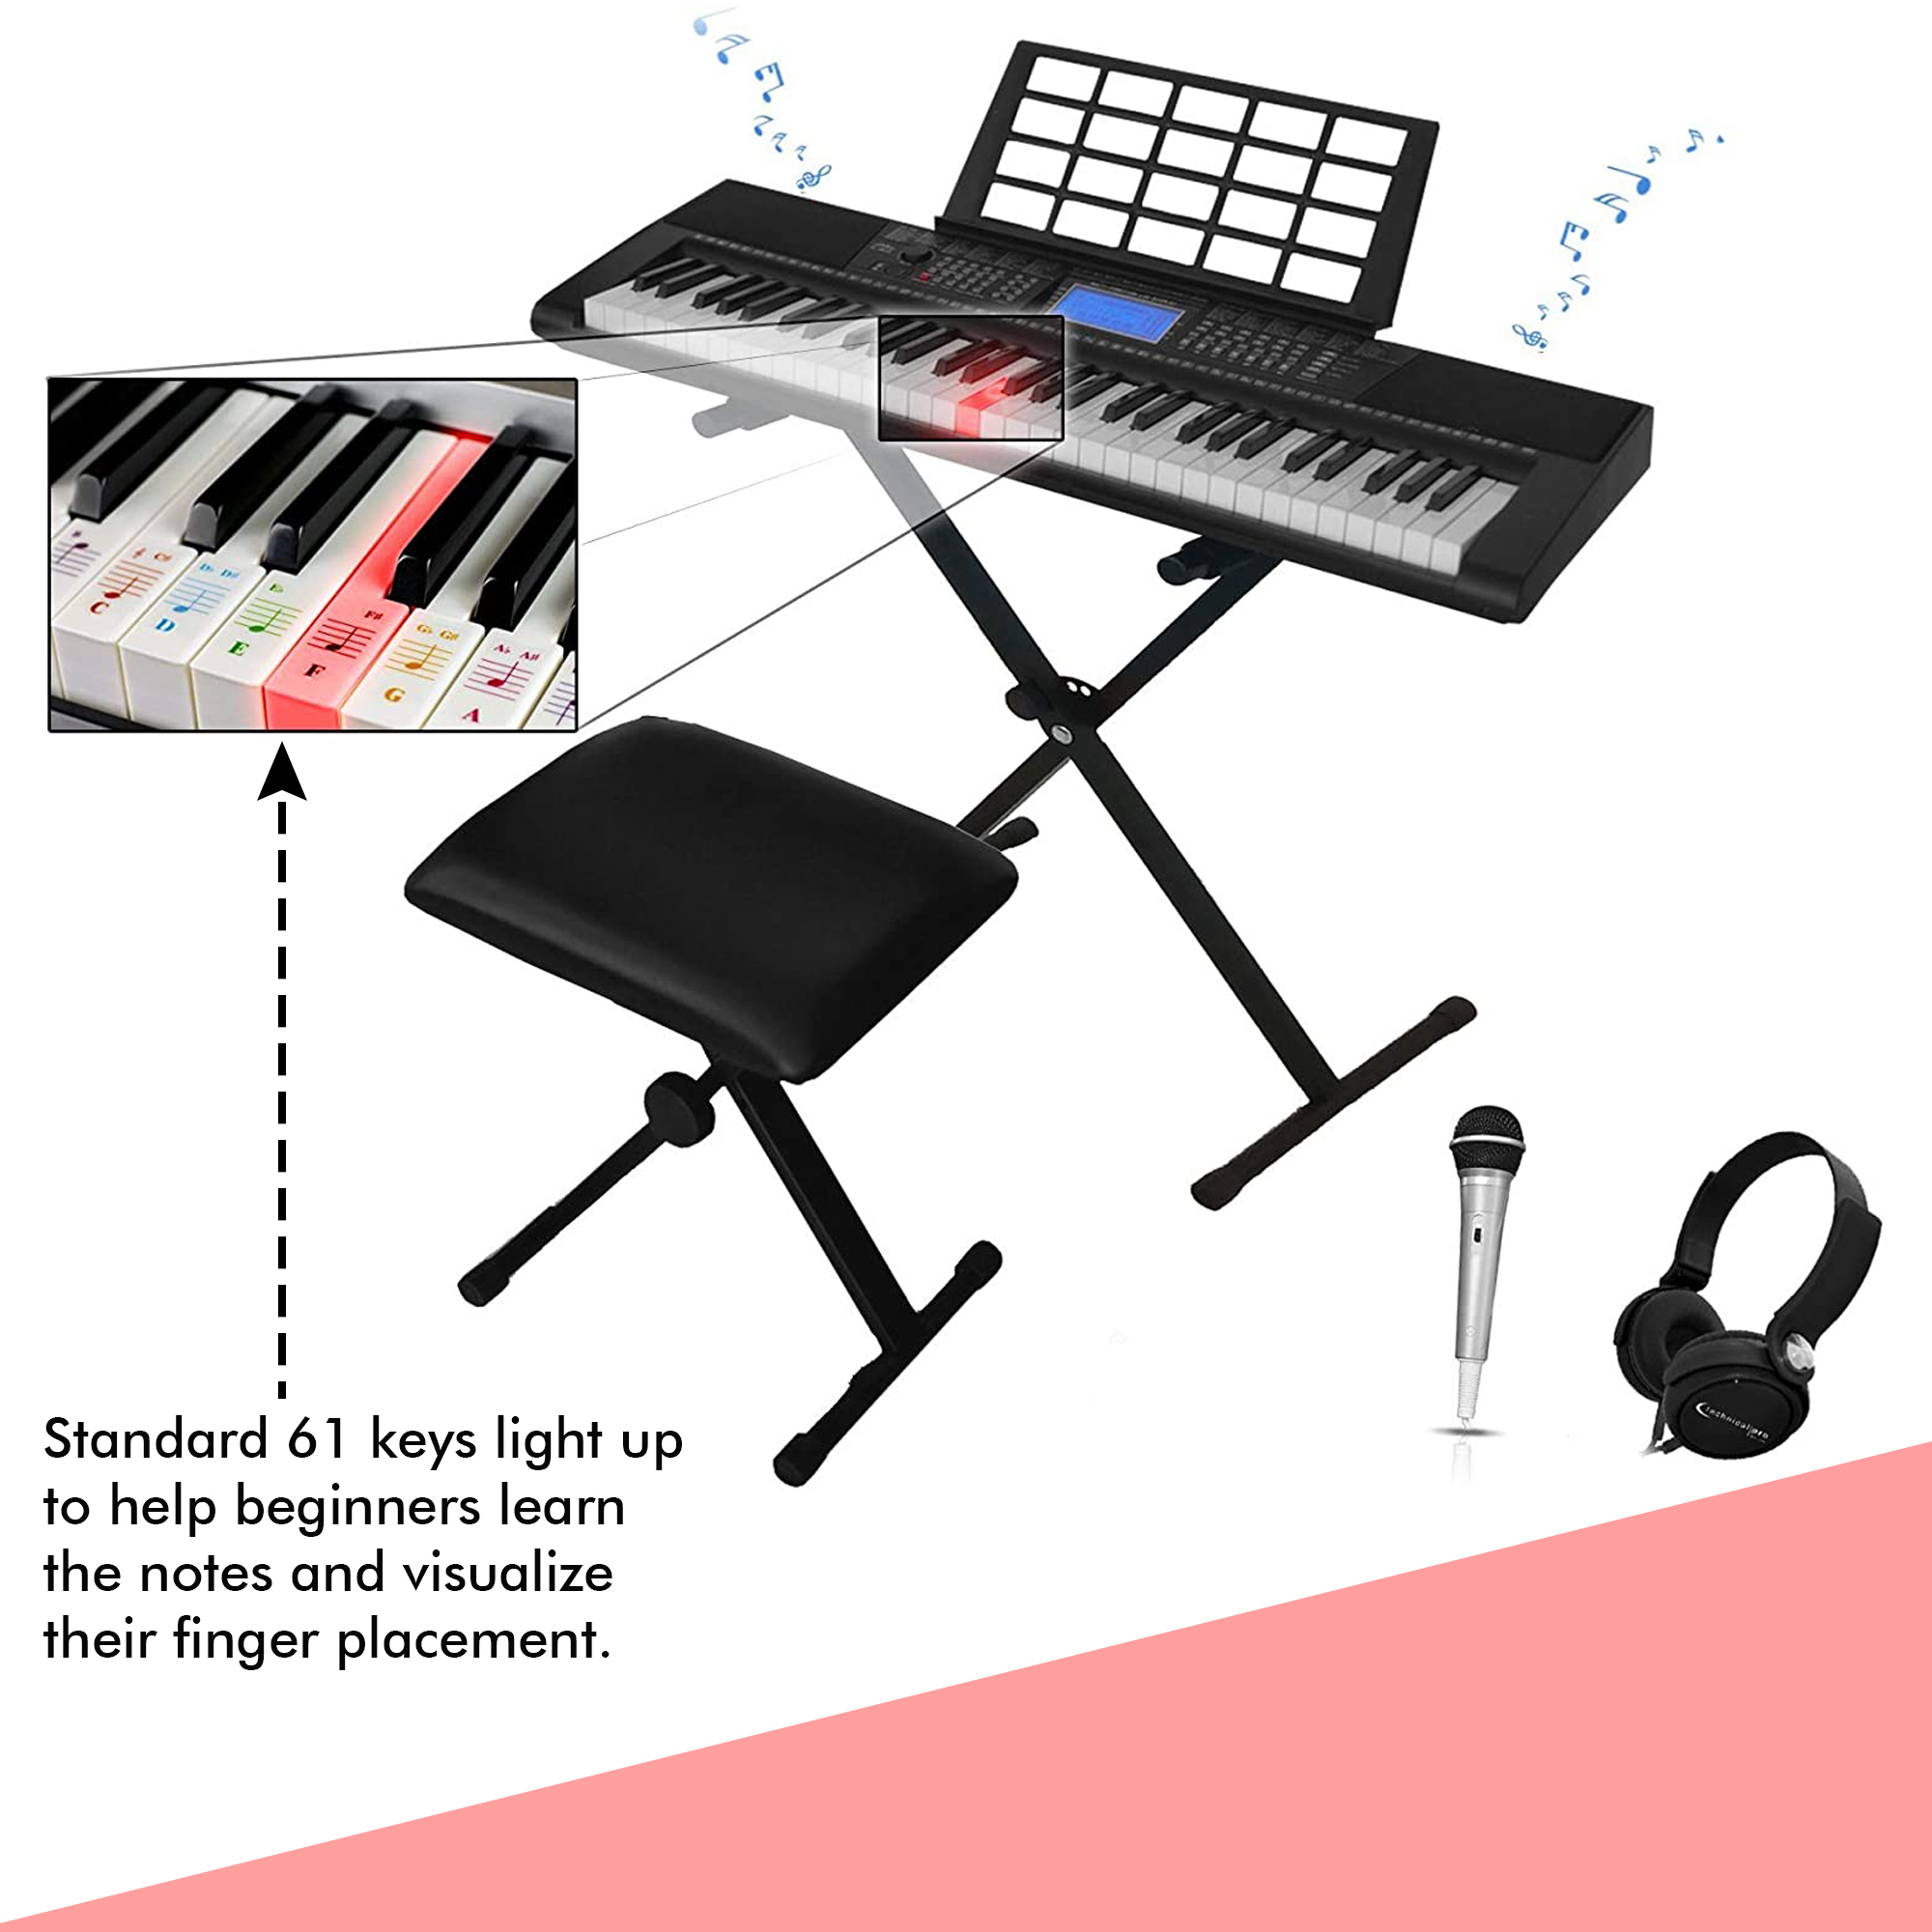 Technical Pro 61 Keys Electric Piano Learning Keyboard Bundle With Seat, Stand And Mic, 3x Learning Mode, Built In Speaker Headphone